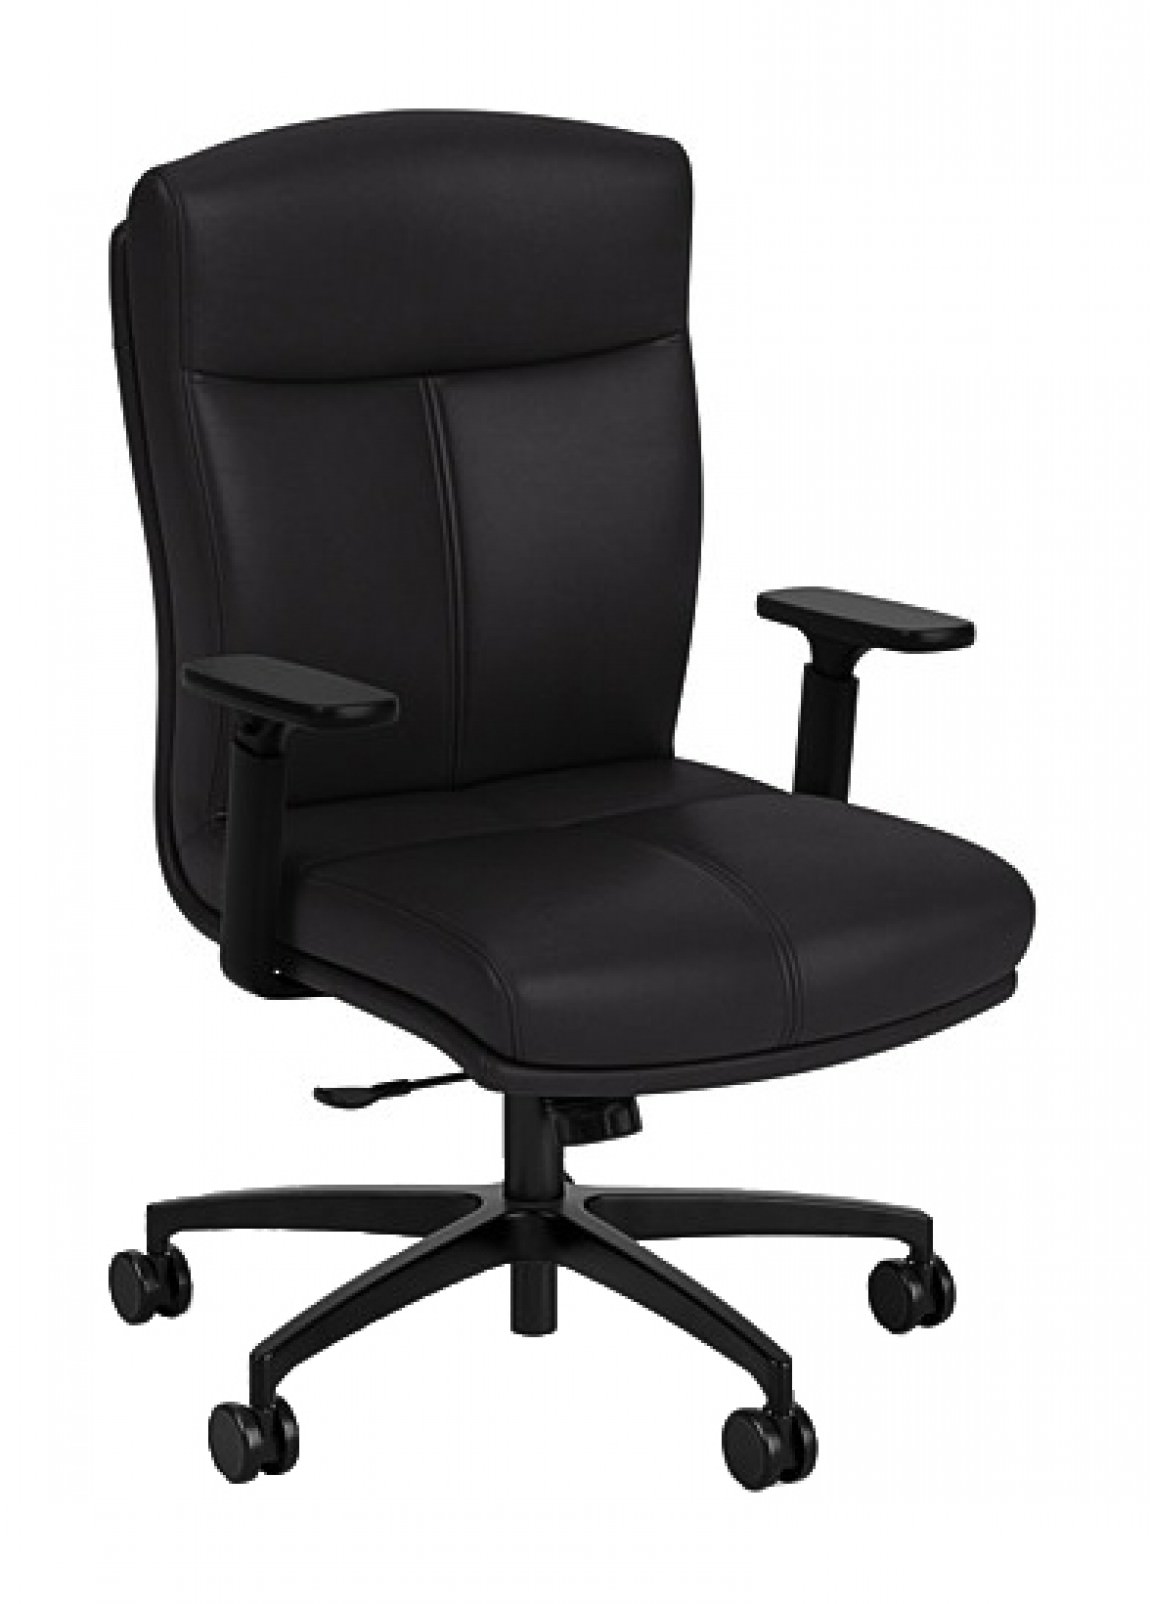 Office Factor Black Mesh High Back Executive Office Chair, Adjustable Arms,  Head Rest, Seat Depth, Lumbar Support, Height, PU Casters, Ergonomic